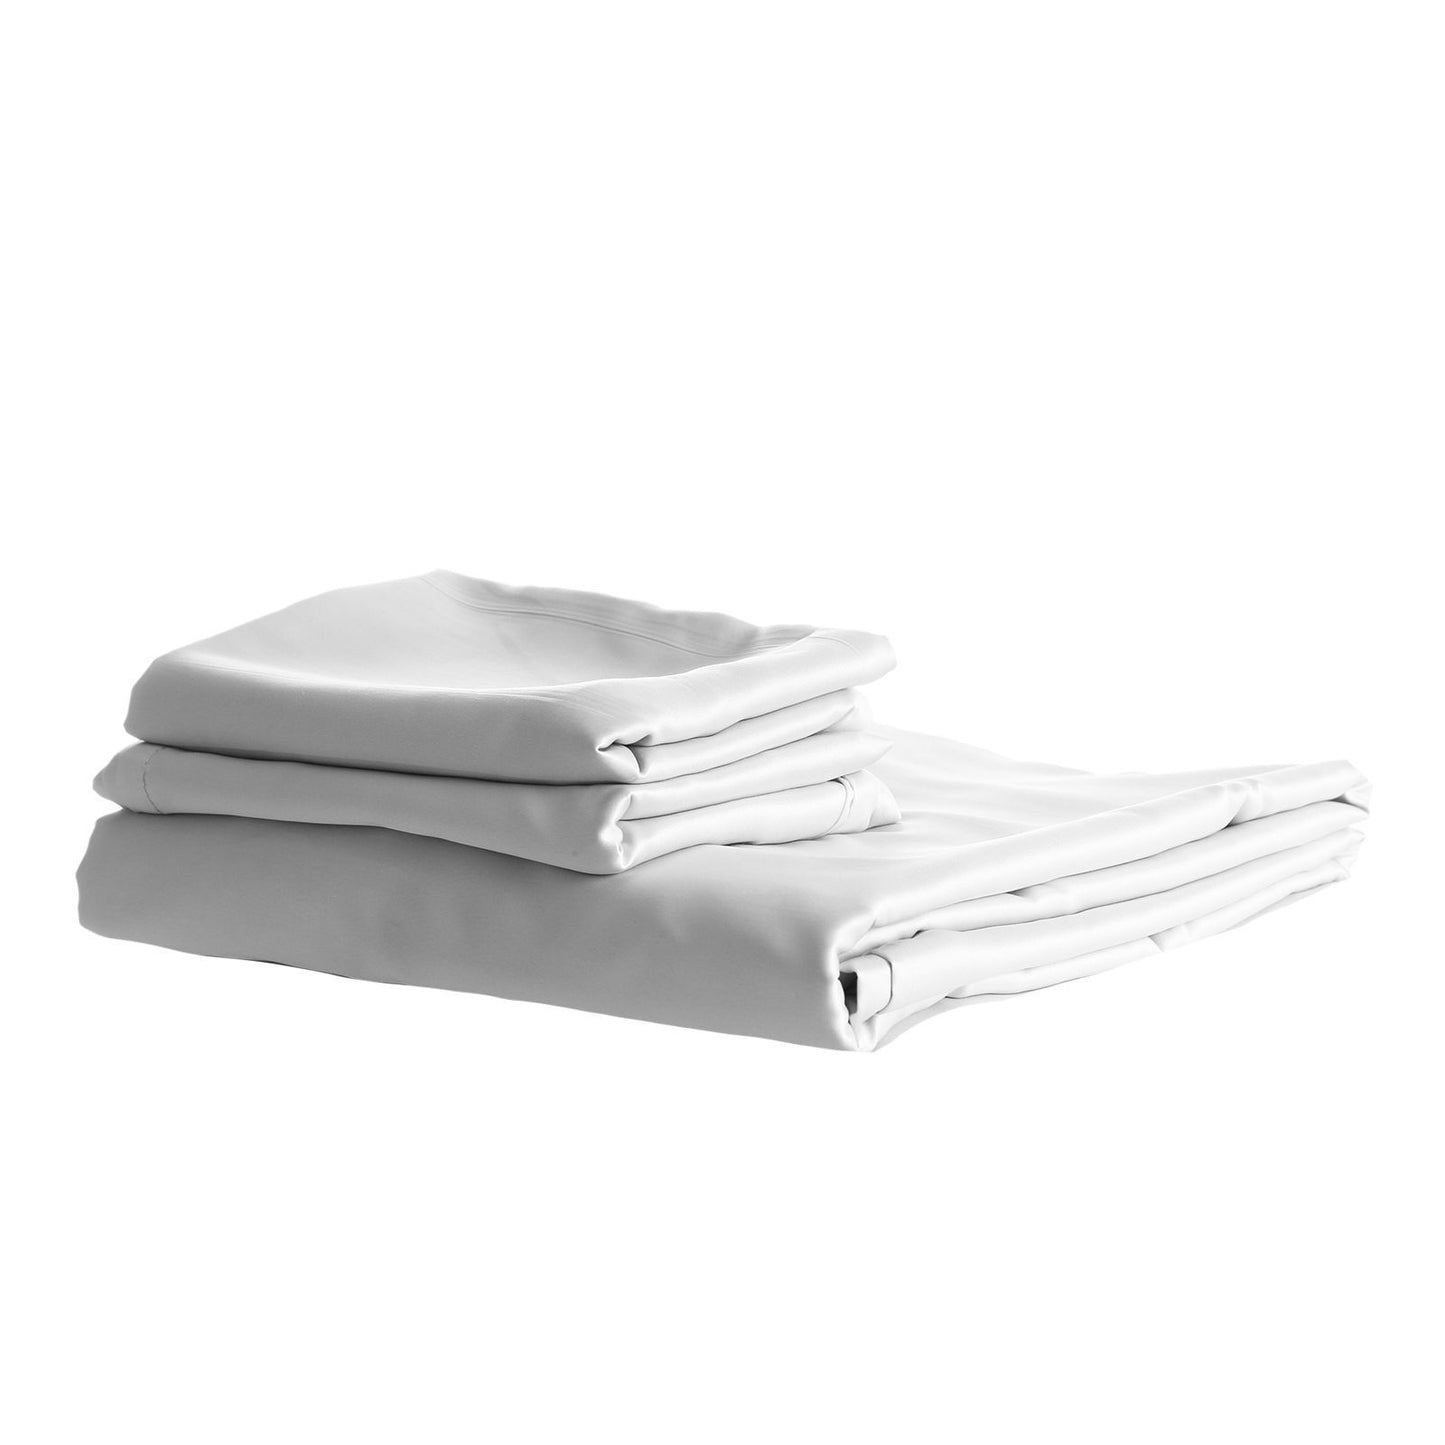 KING 1500TC 3-Piece Cotton Rich Fitted Sheet Sets - White